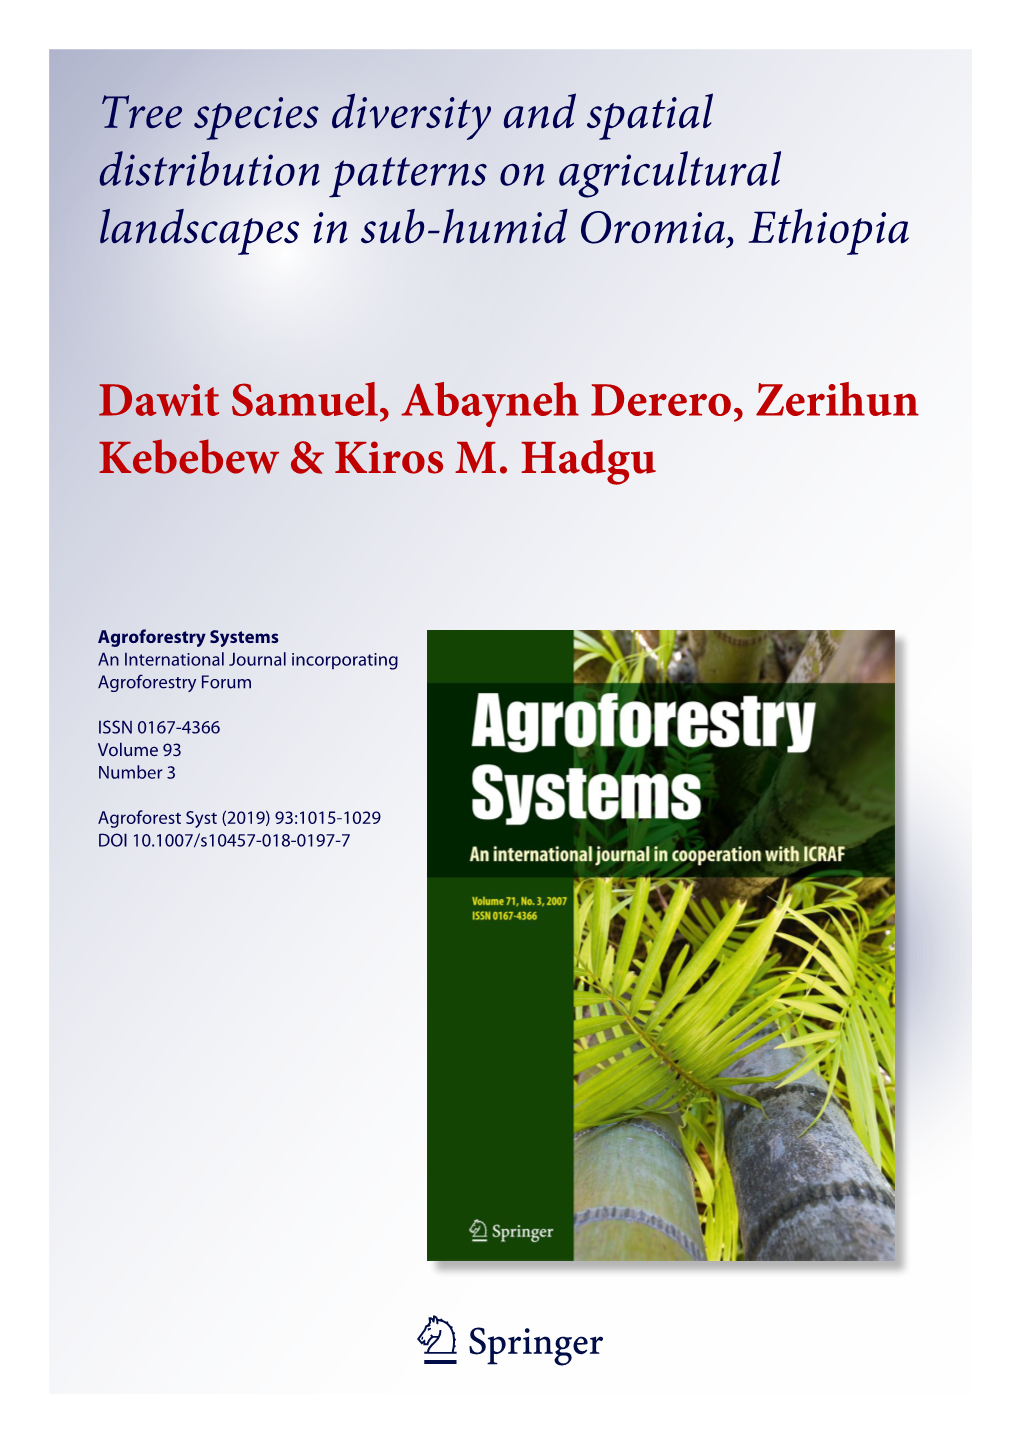 Tree Species Diversity and Spatial Distribution Patterns on Agricultural Landscapes in Sub-Humid Oromia, Ethiopia